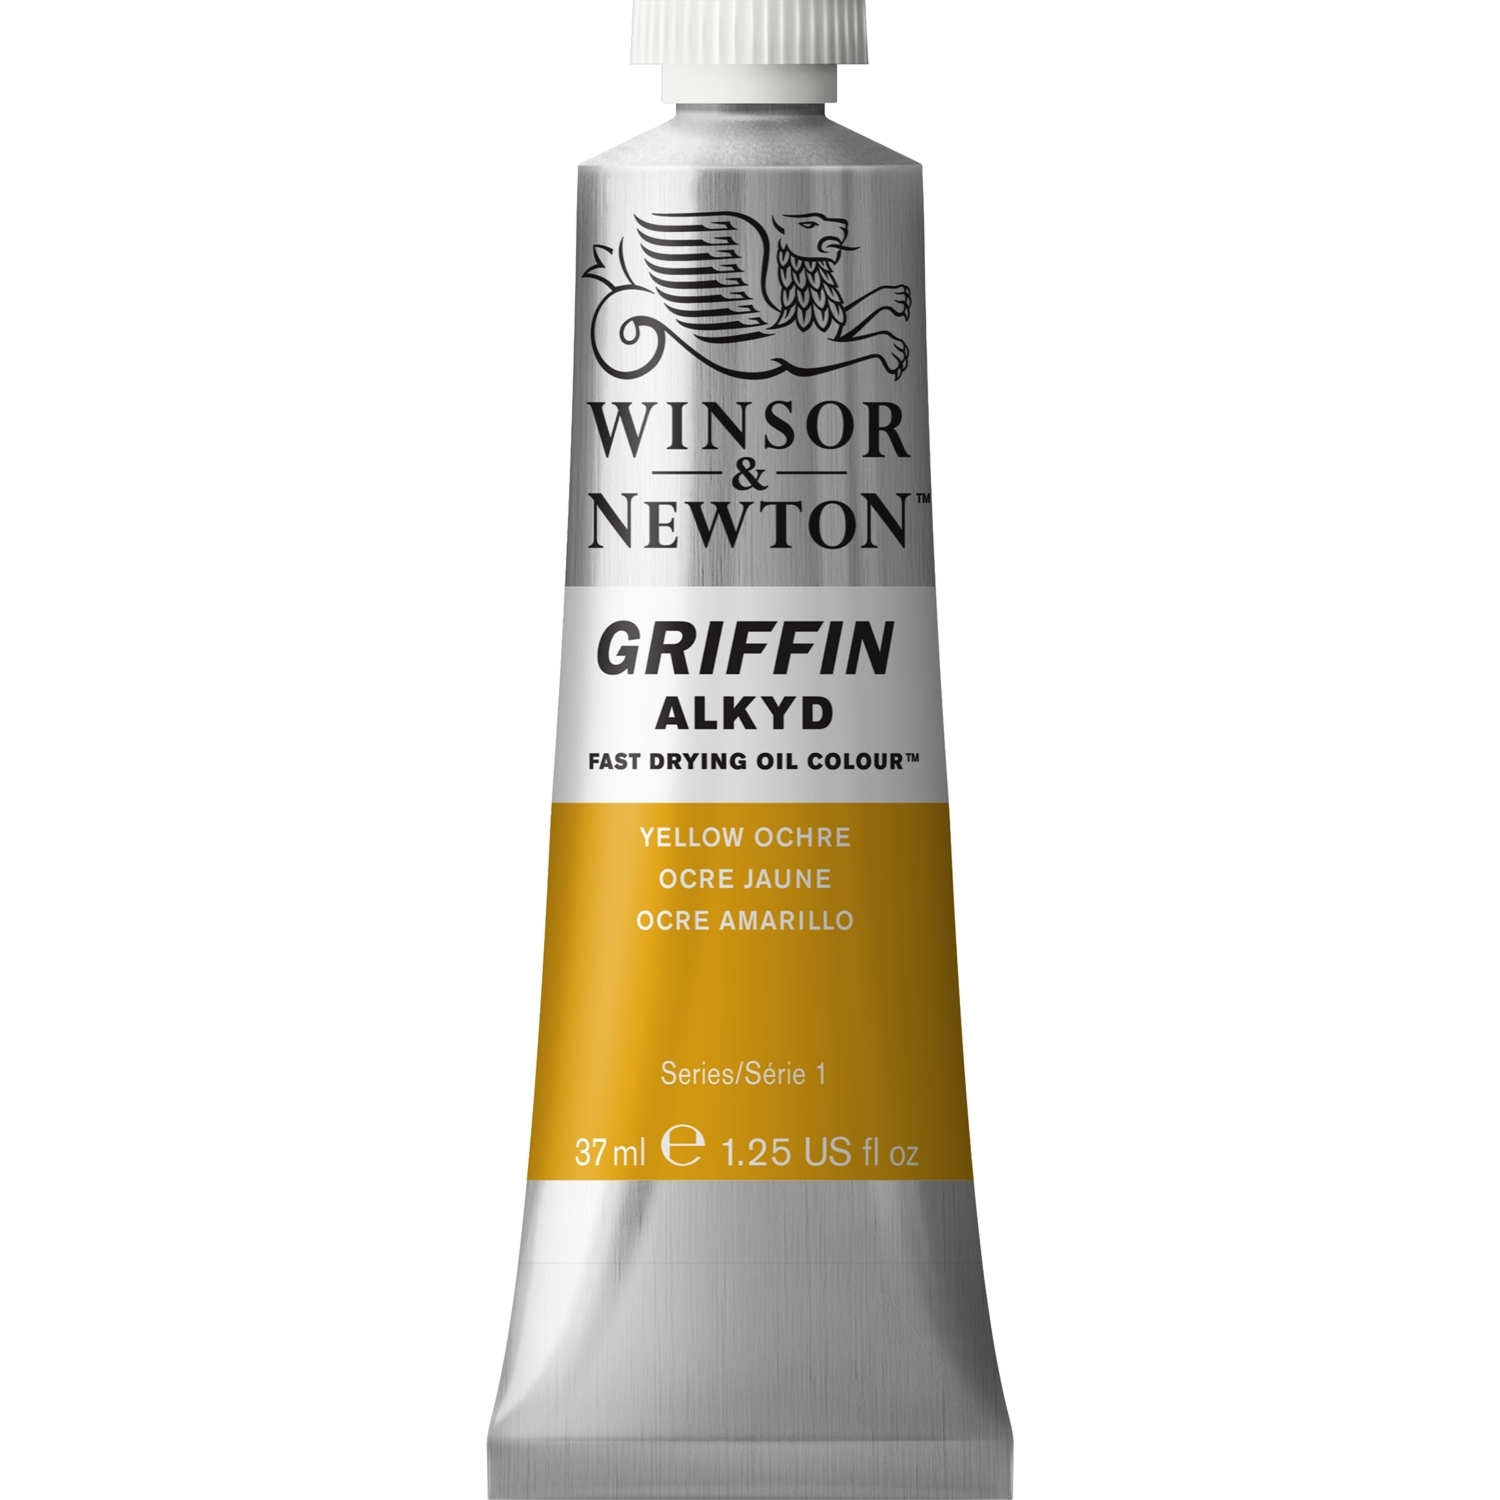 Winsor and Newton Griffin Alkyd Oil Colour - Yellow Ochre Image 1